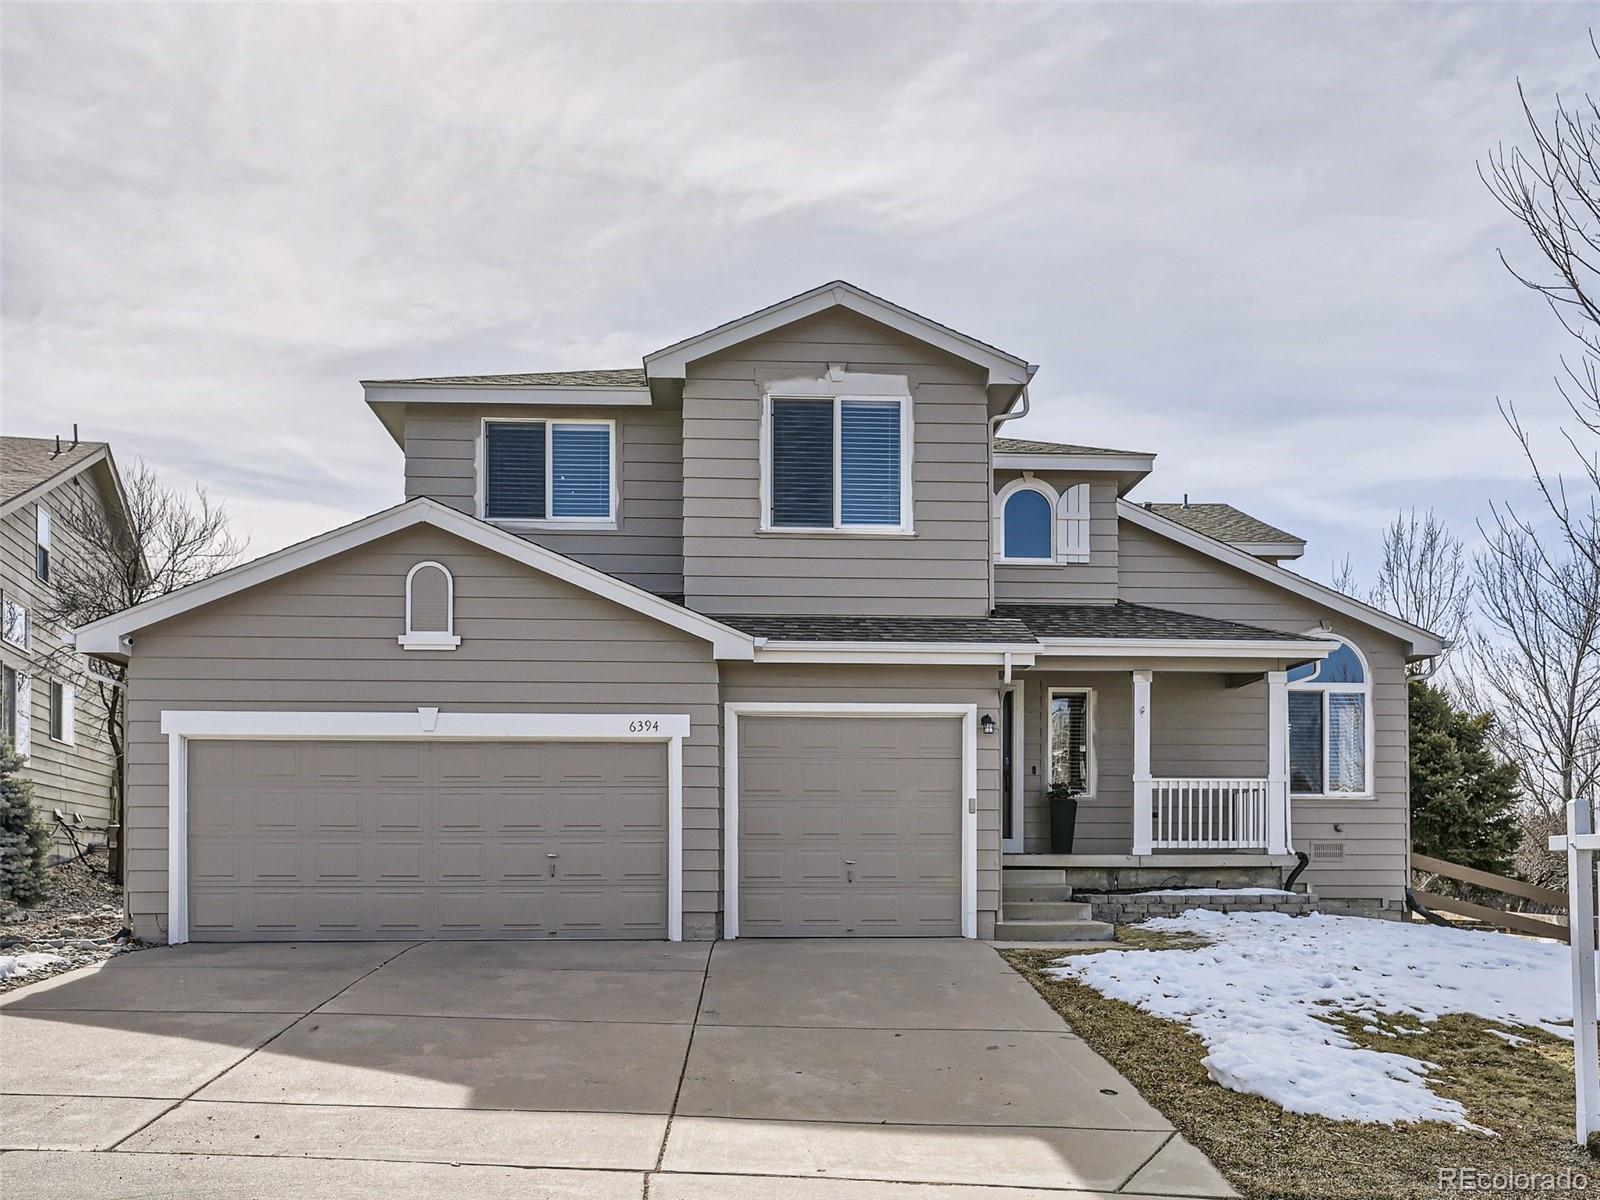 6394  Shannon Trail, highlands ranch MLS: 2055298 Beds: 4 Baths: 4 Price: $827,500